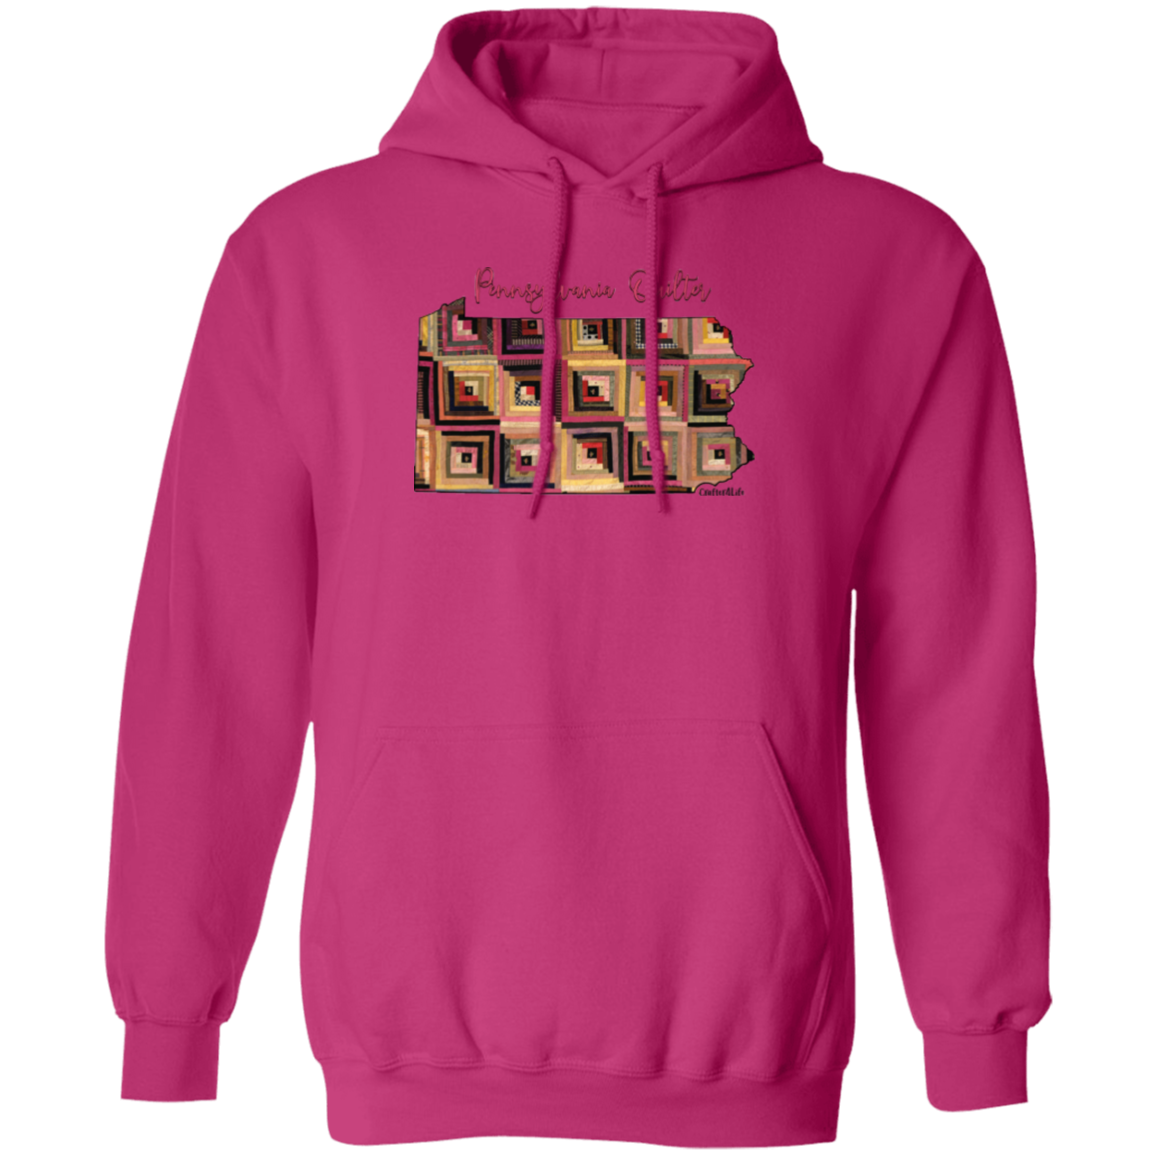 Pennsylvania Quilter Pullover Hoodie, Gift for Quilting Friends and Family